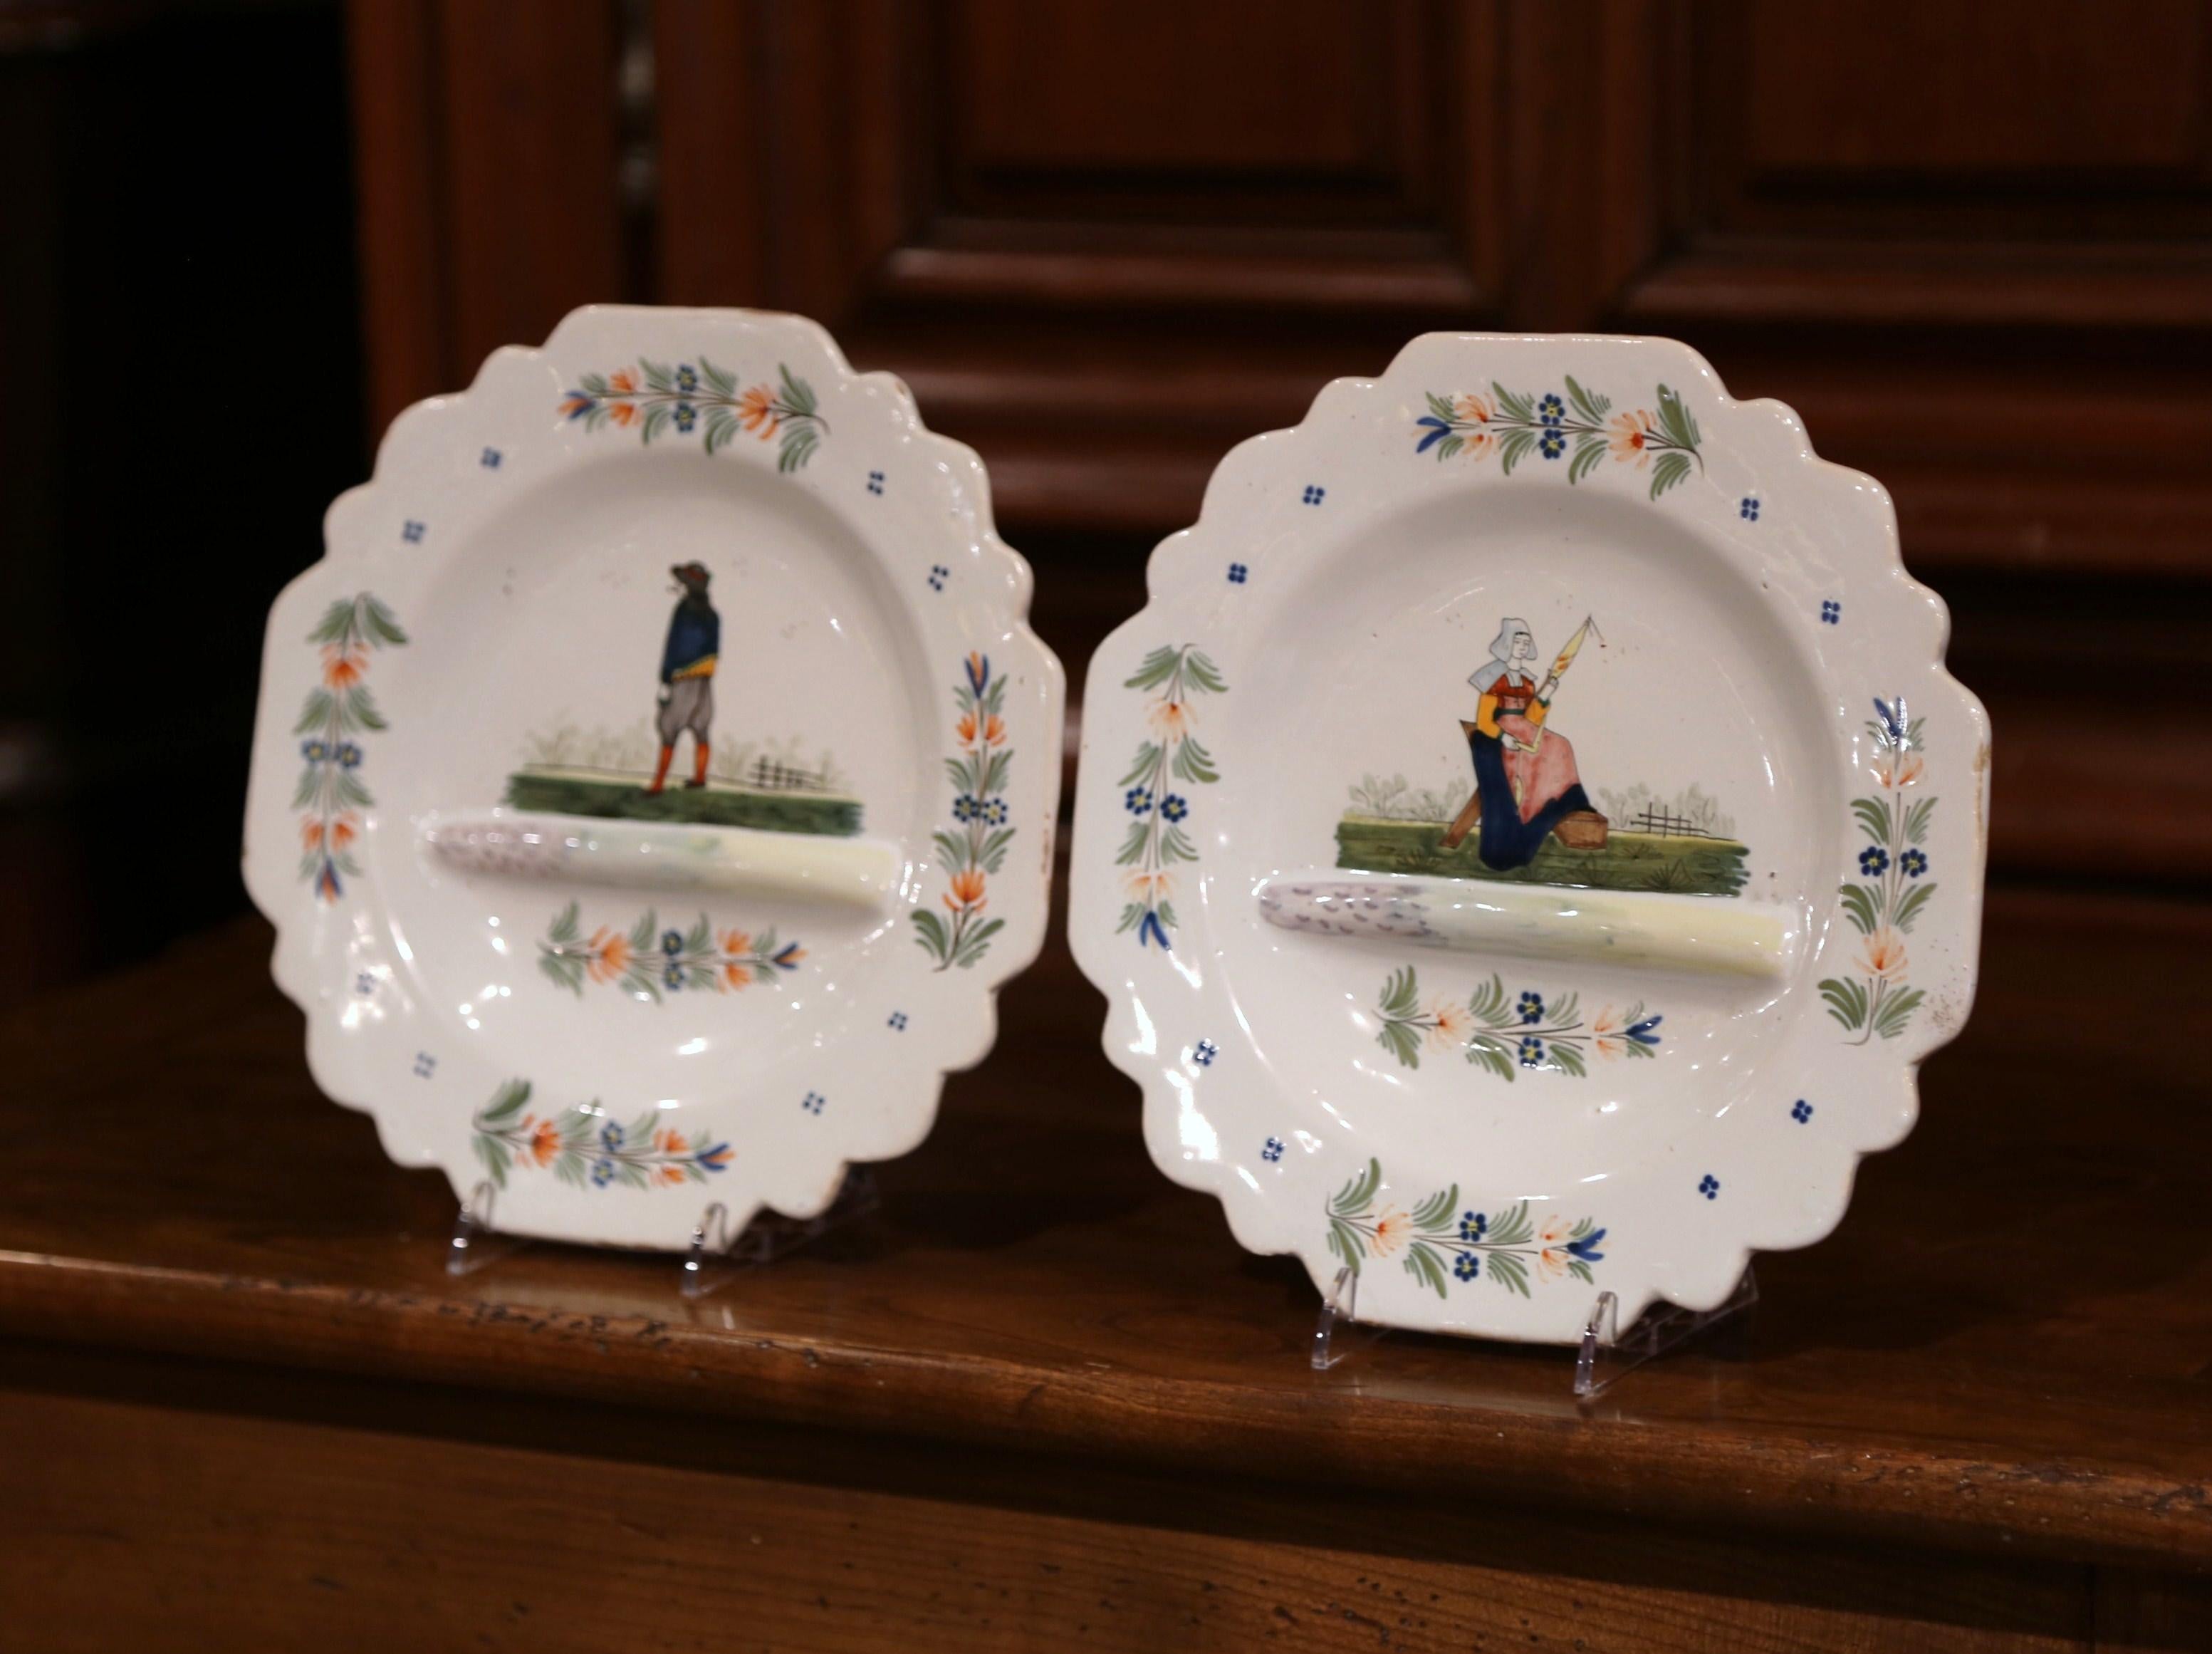 Decorate a shelf with this pair of antique decorative plates from Brittany, France. Crafted circa 1883-1895, each faience plate is hand painted with traditional Breton figure motifs along with floral embellishments. Both plates are in excellent